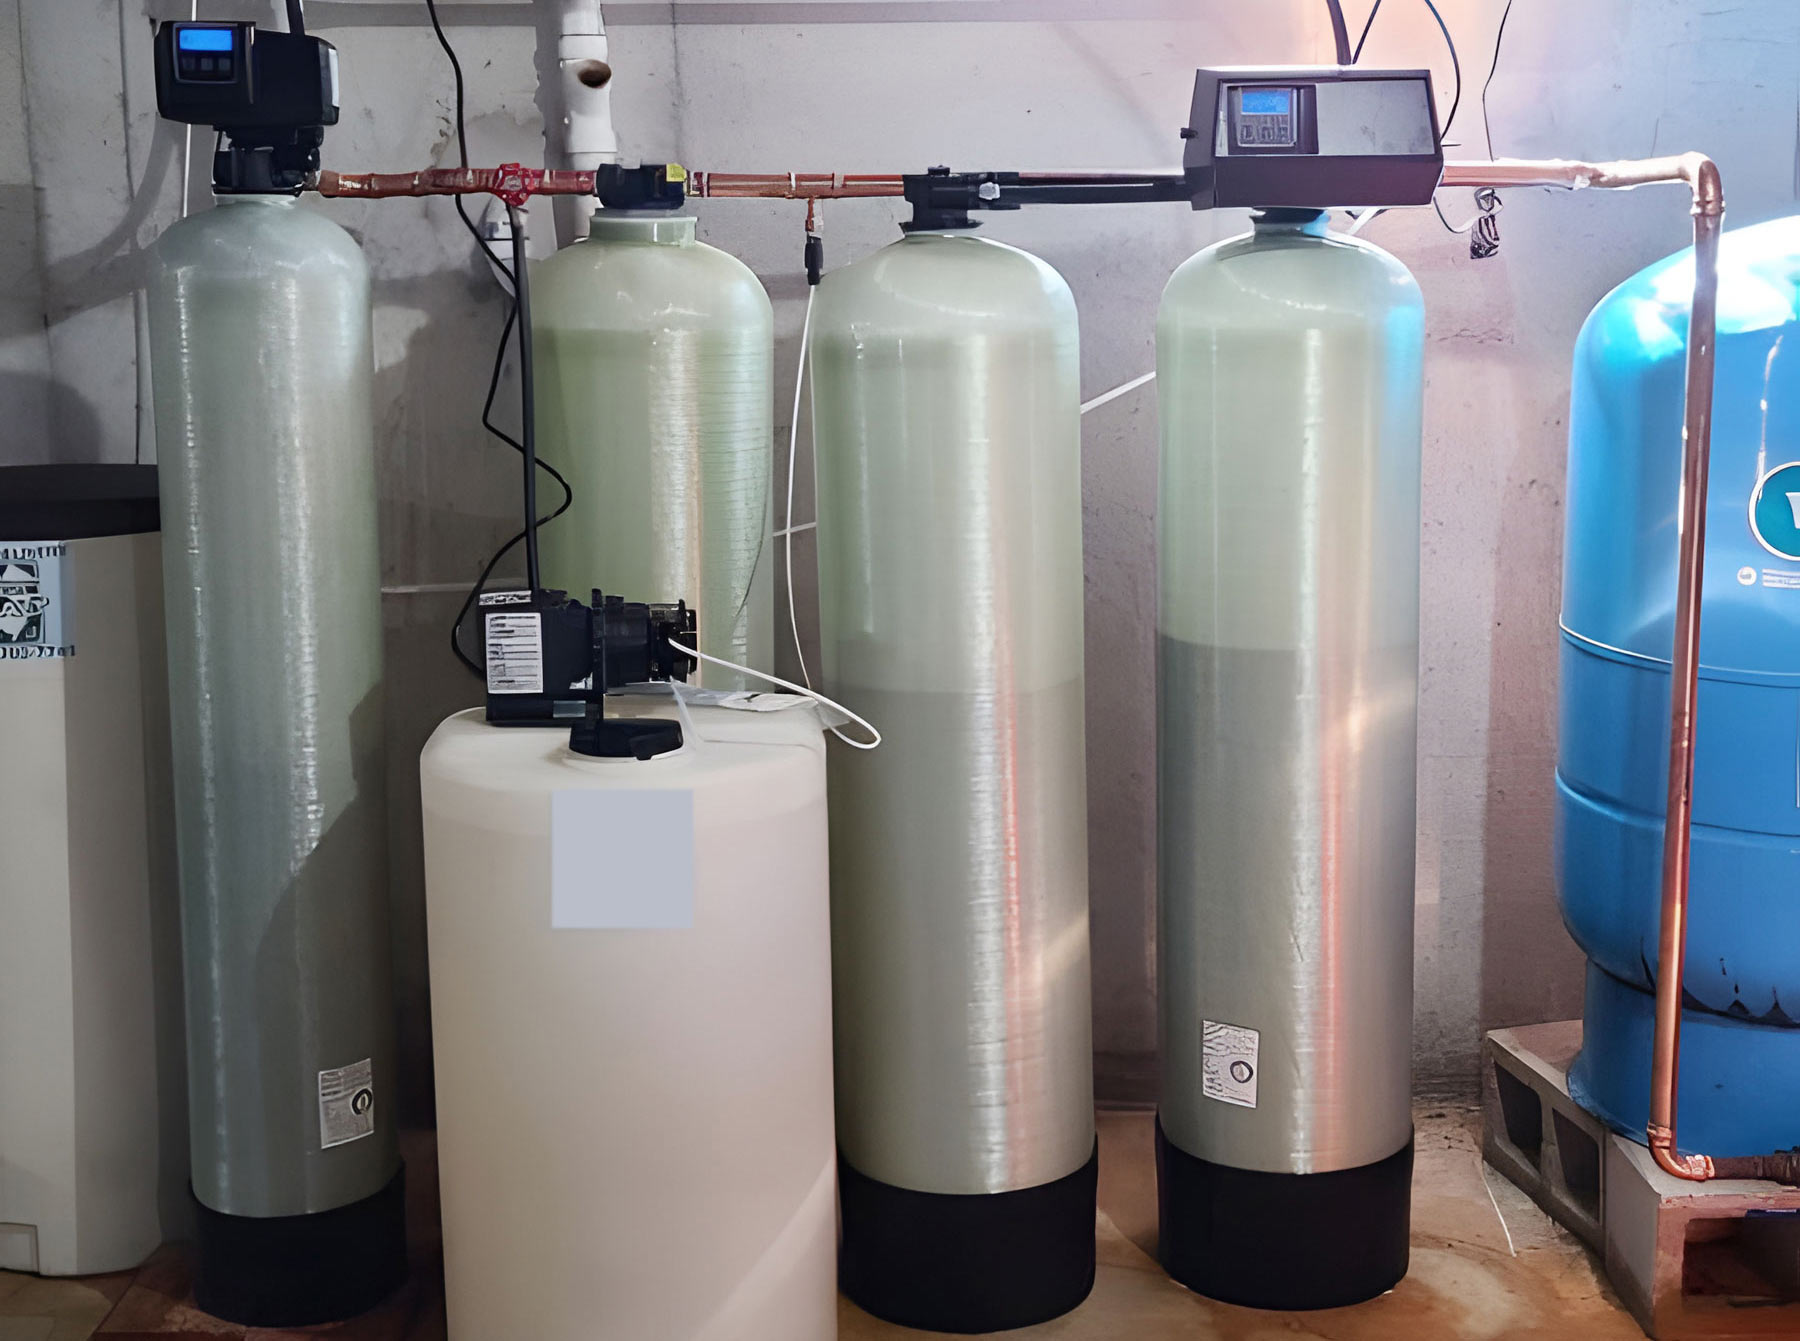 Admiral Water | Water Treatment Filter Systems in Allentown, NJ 08501